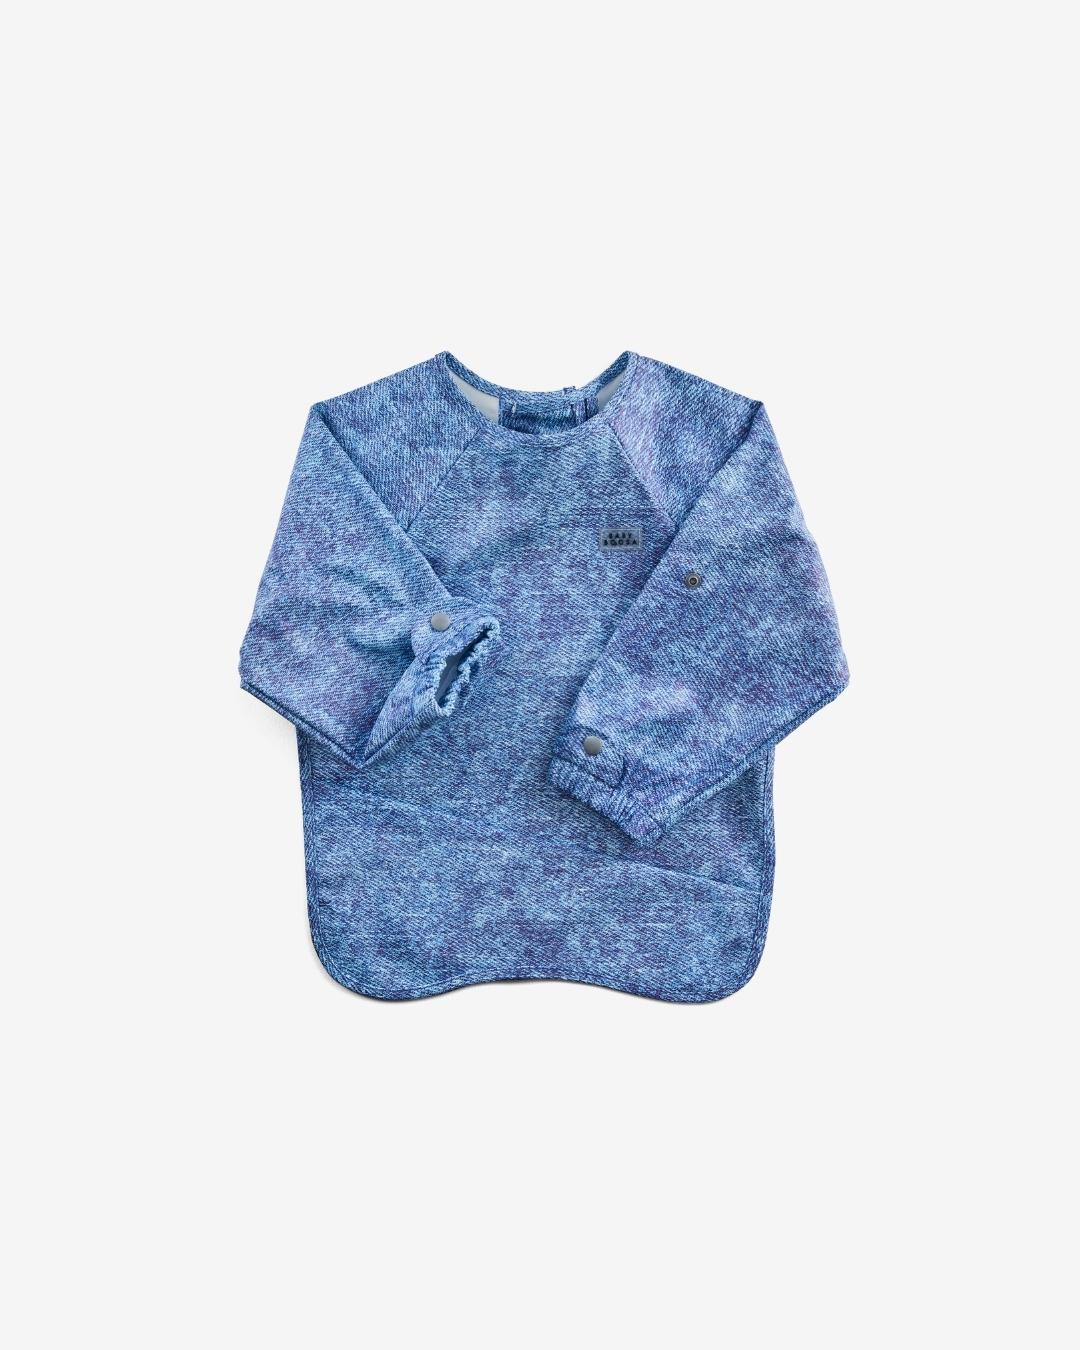 Comfort Fit Coverall Bib | Adjustable Neck &amp; Arms | Easy Clean | No-mess | Waterproof | Eco Recycled (Denim Blue Print)